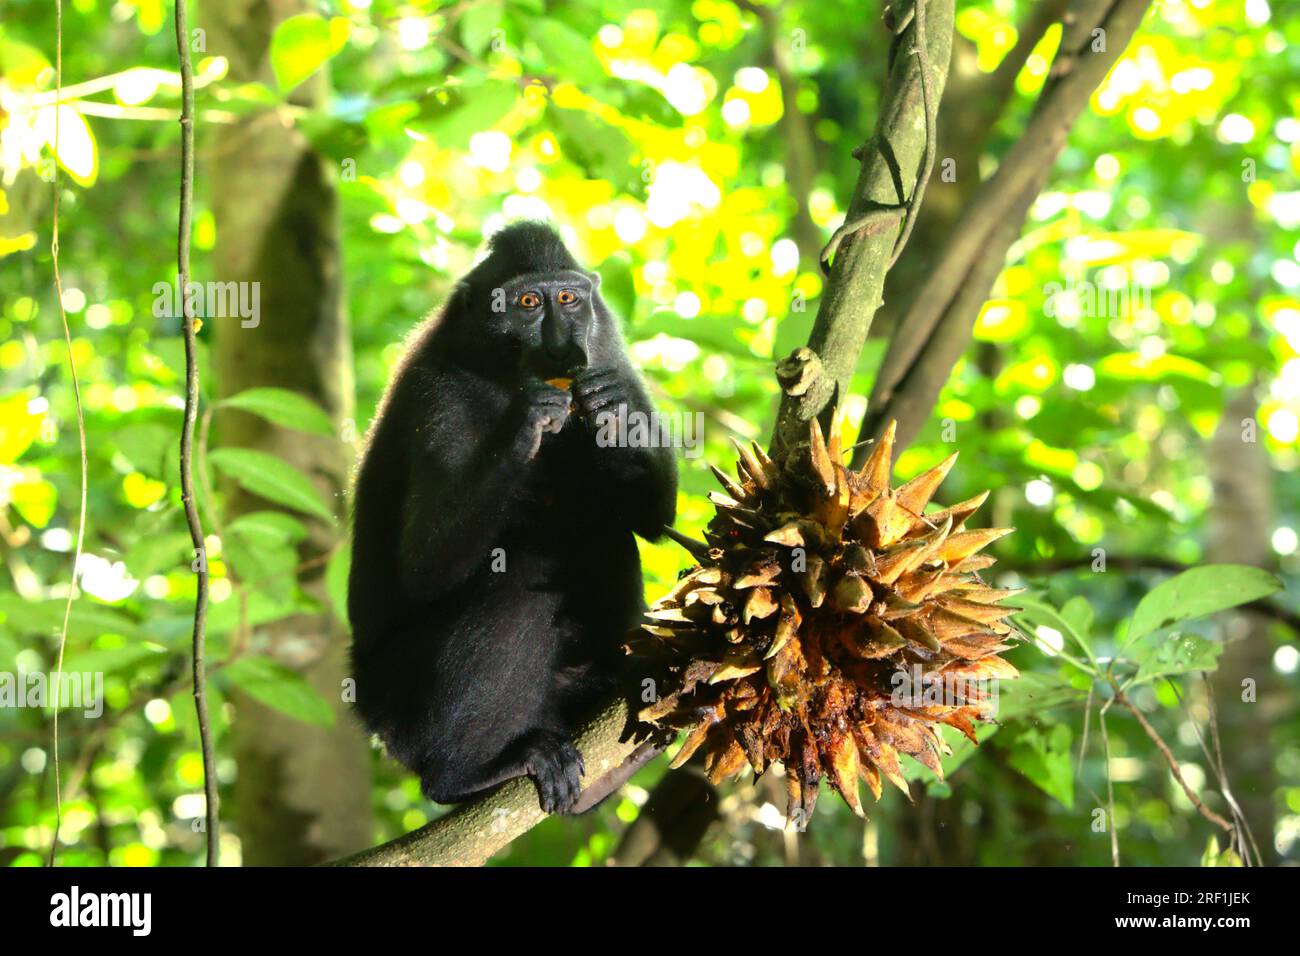 A Sulawesi black-crested macaque (Macaca nigra) is eating liana fruit in Tangkoko Batuangus Nature Reserve, North Sulawesi, Indonesia. The temperature increased in Tangkoko forest, and the overall fruit abundance decreased, according to a team of scientists led by Marine Joly, as published on International Journal of Primatology in July 2023. 'Between 2012 and 2020, temperatures increased by up to 0.2 degree Celsius per year in the forest, and the overall fruit abundance decreased by 1 percent per year,” they wrote. Stock Photo